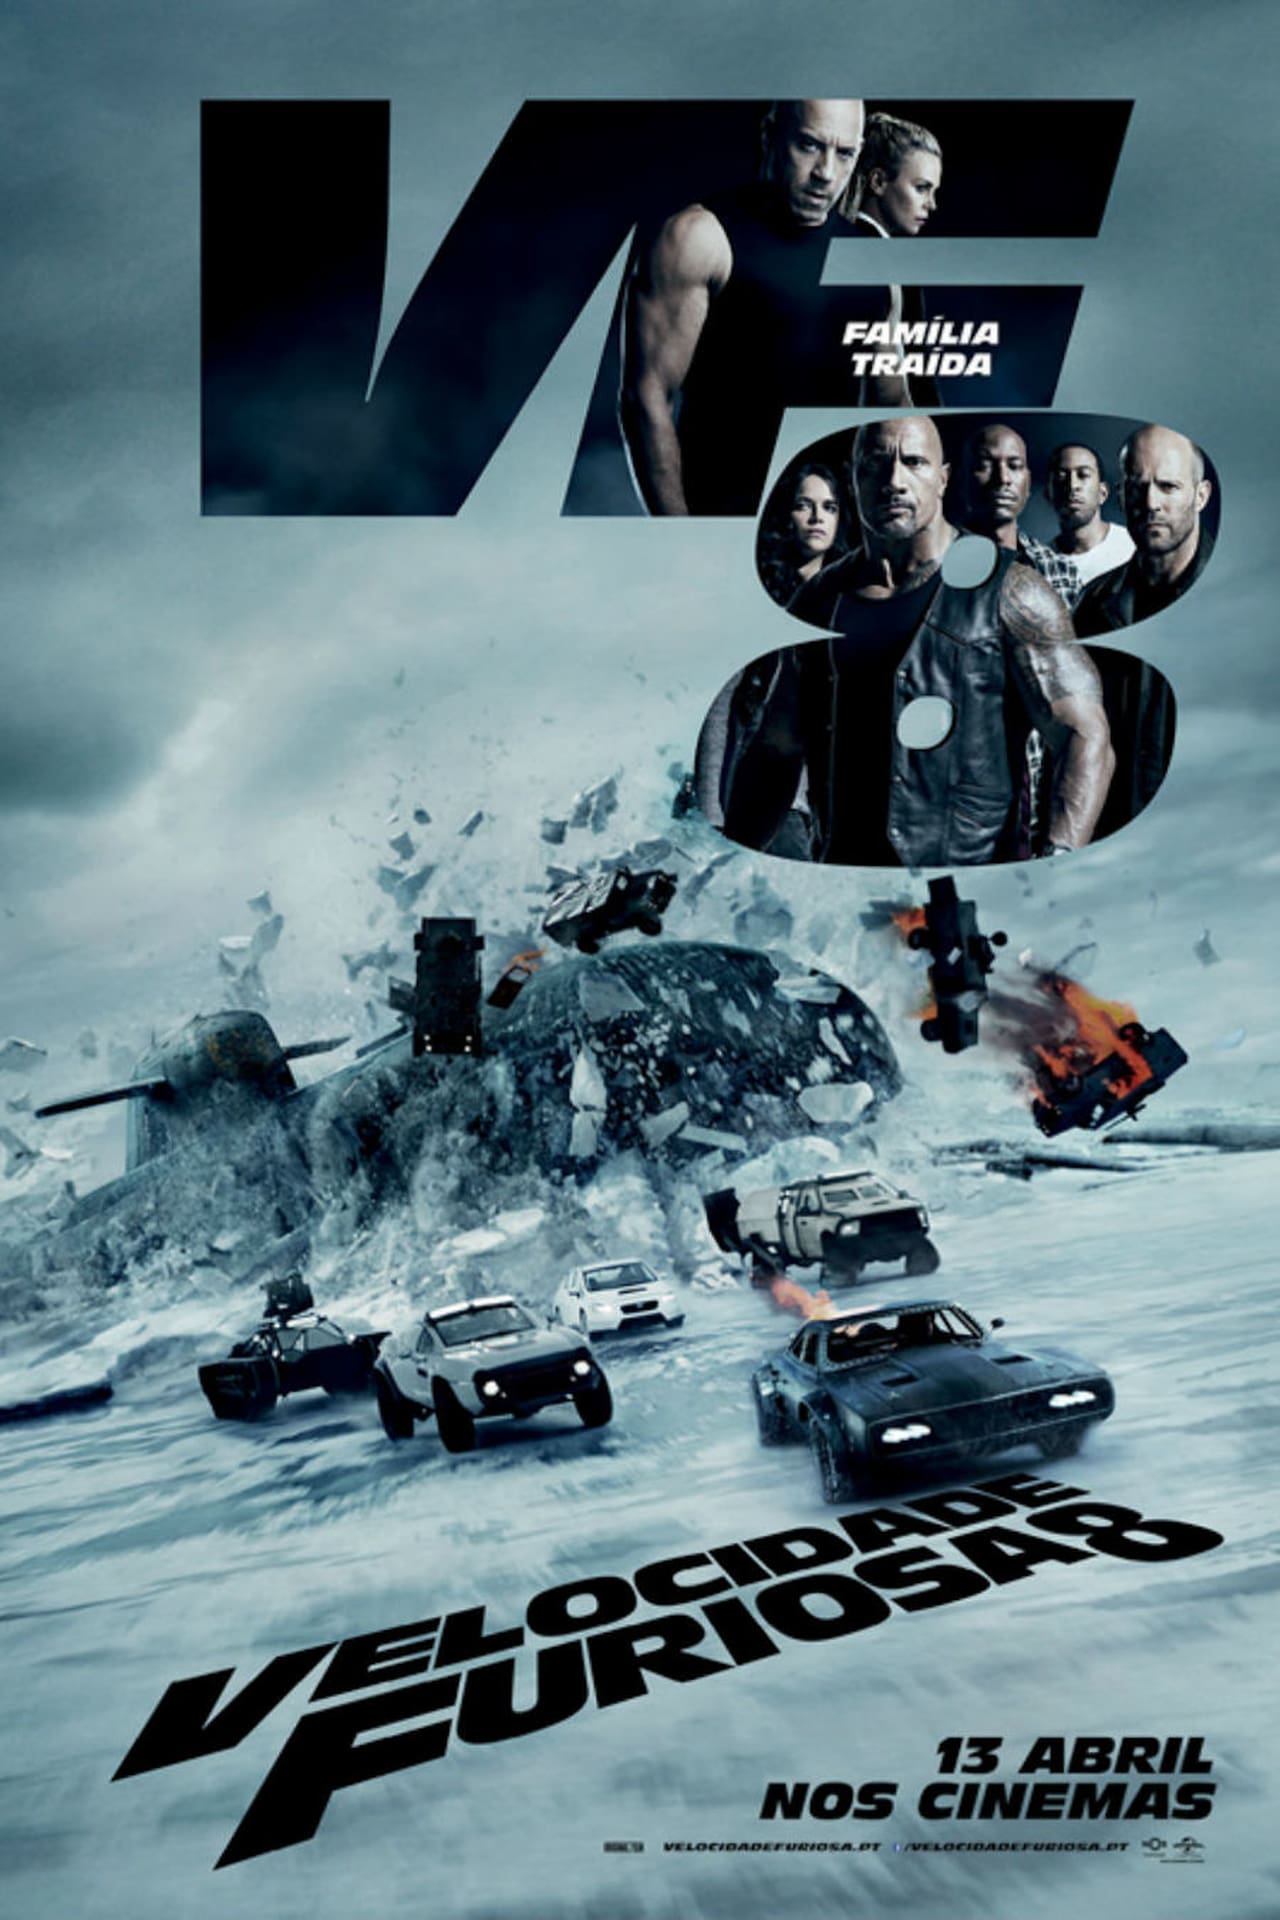 fate of the furious full movie